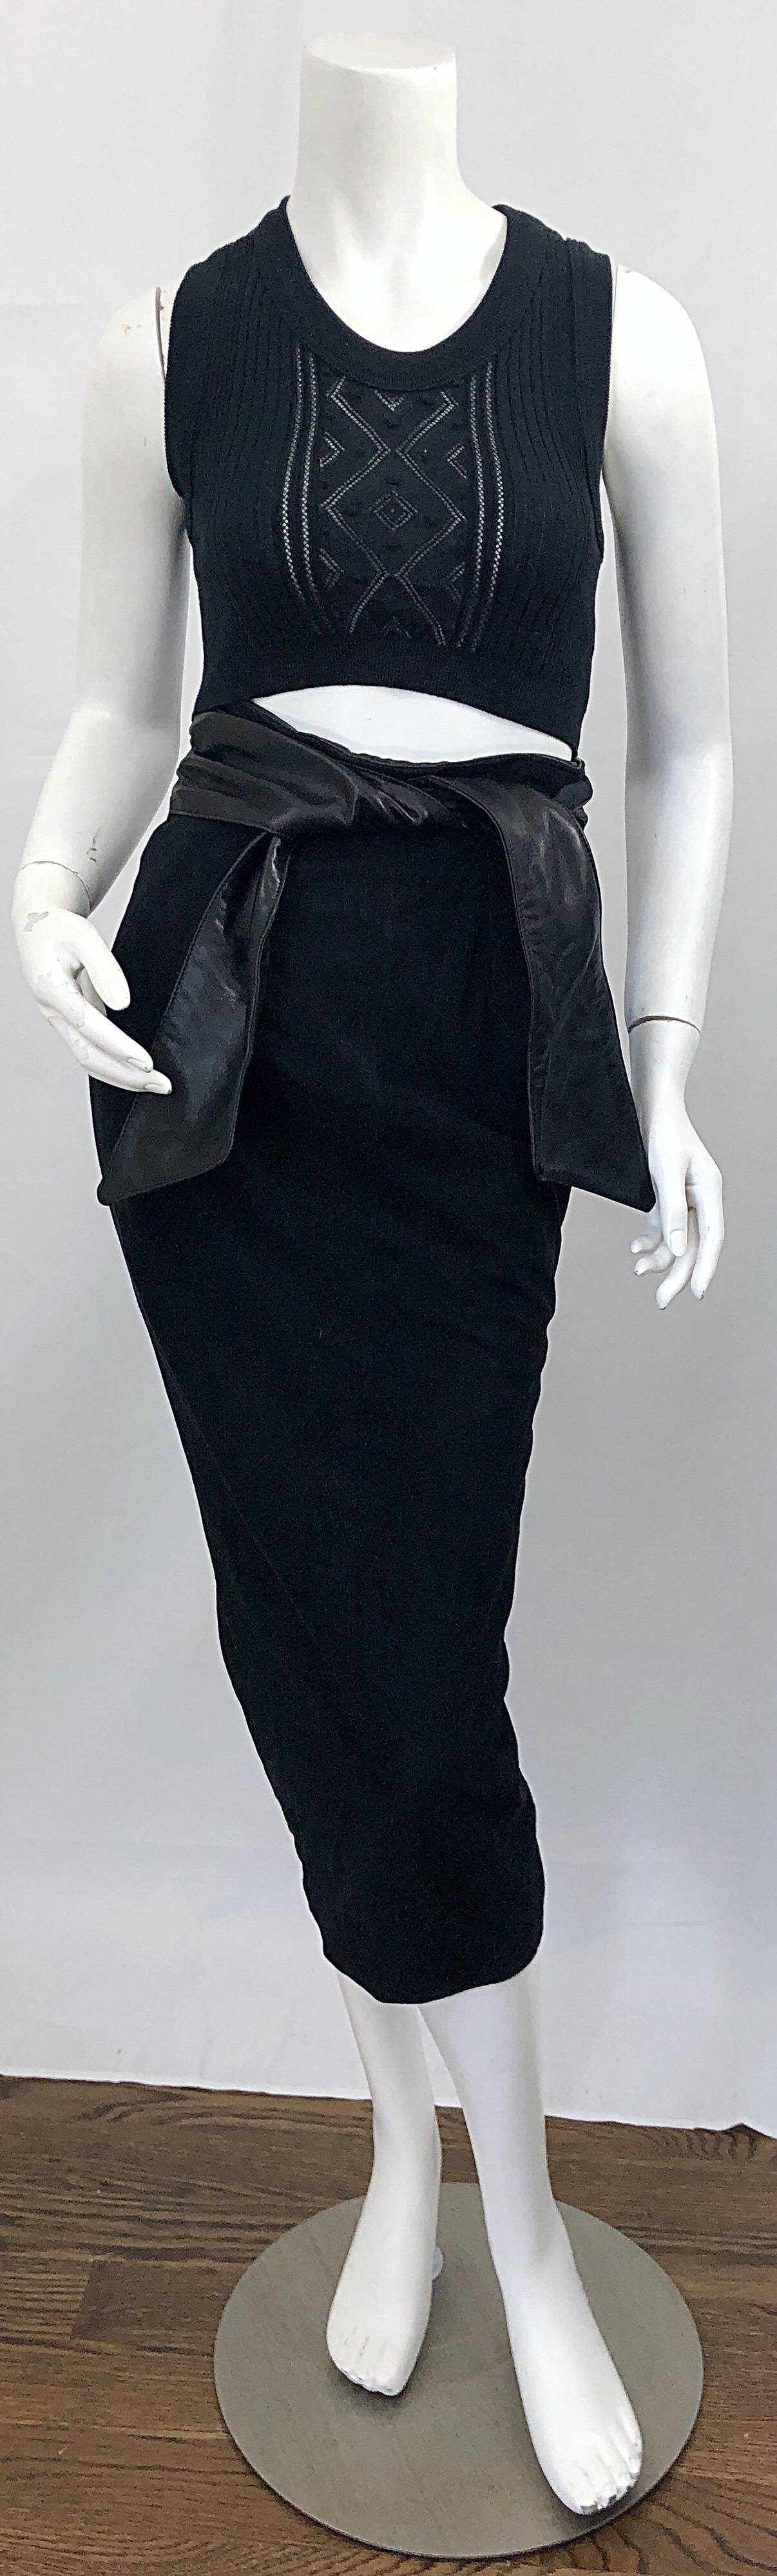 Chic 1990s VAKKO Size 4 black suede and leather high waisted belted pencil midi skirt! Wonderful form fitting silhouette, with attached black leather tie sash belt. Hidden zipper up the back with hook-and-eye closure. Fully lined. The pictured